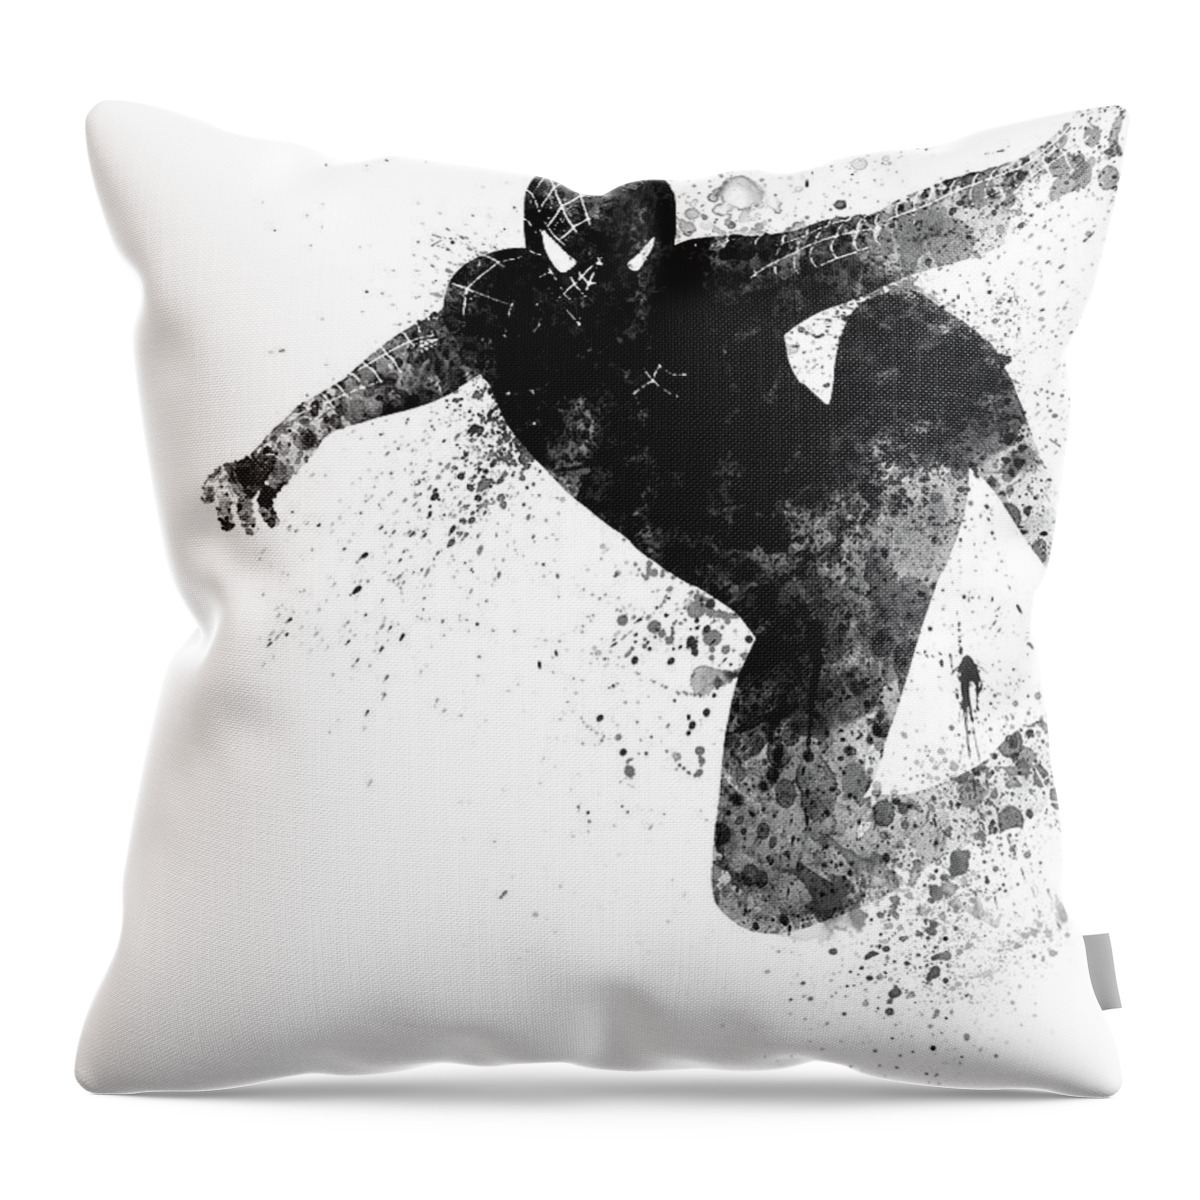 Spiderman Throw Pillow featuring the mixed media Spiderman Watercolor by Naxart Studio